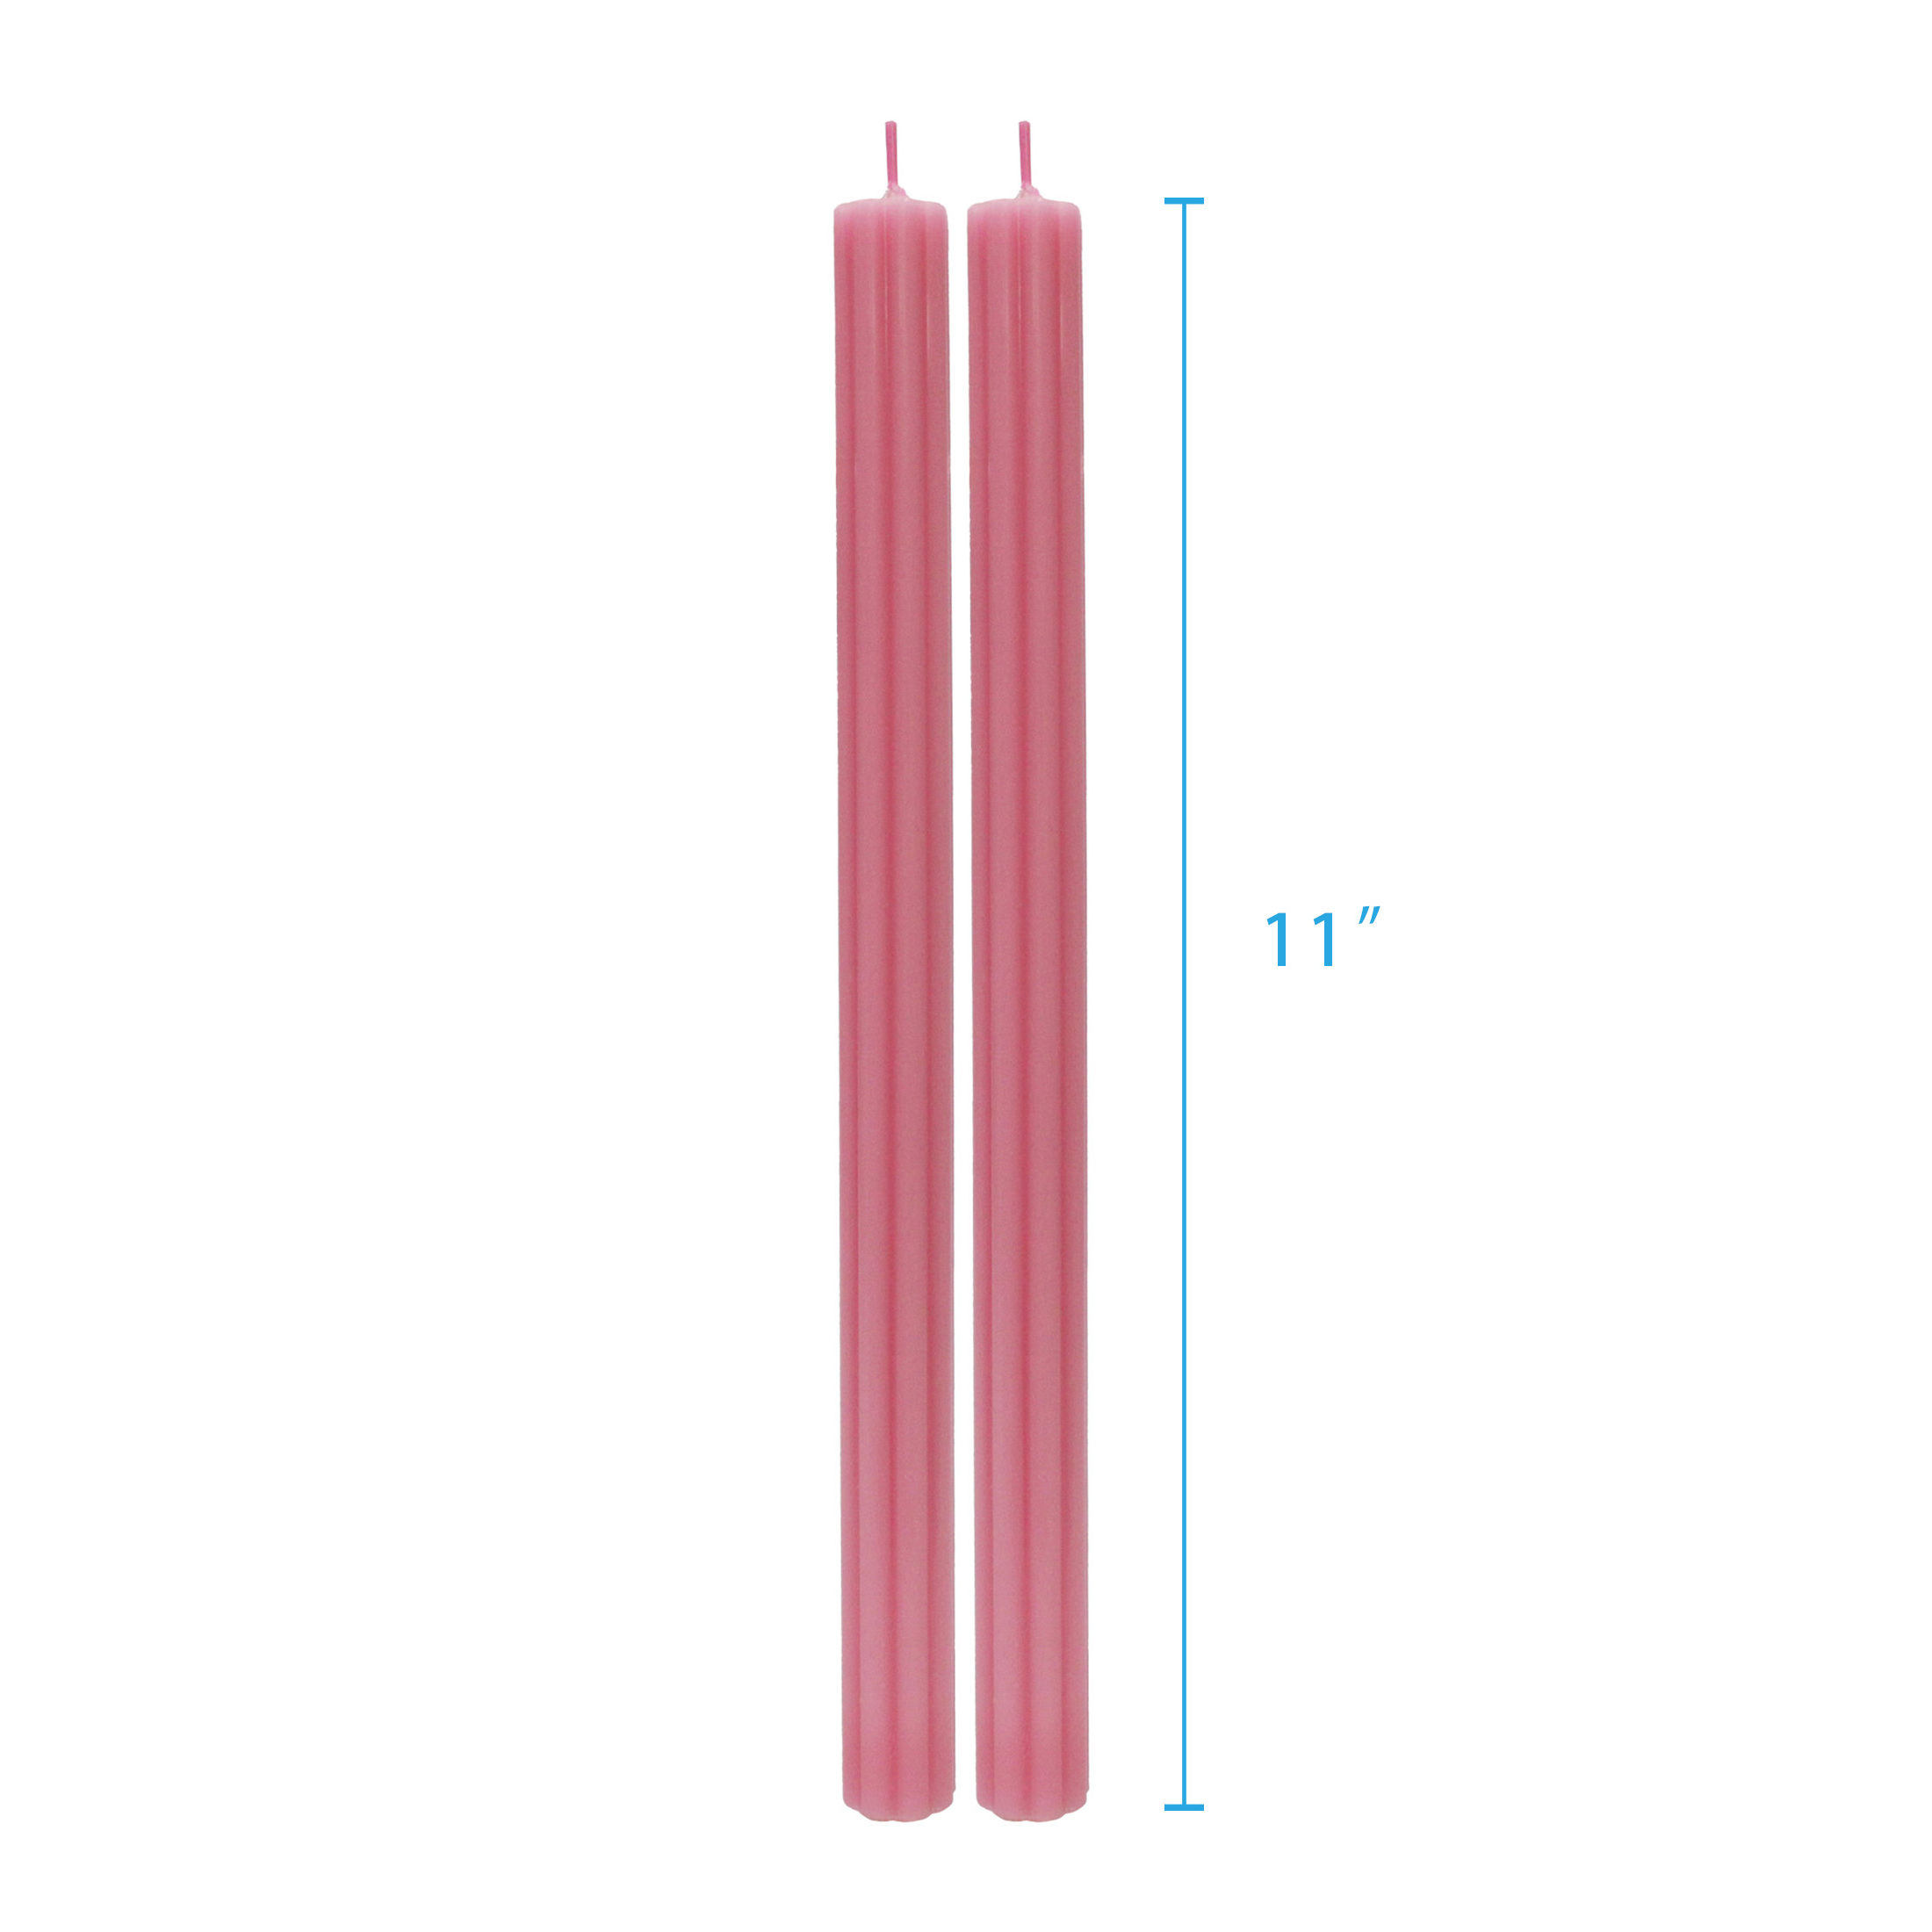 Better Homes & Gardens Unscented Taper Candles, Pink, 2-Pack, 11 inches Height - image 4 of 5